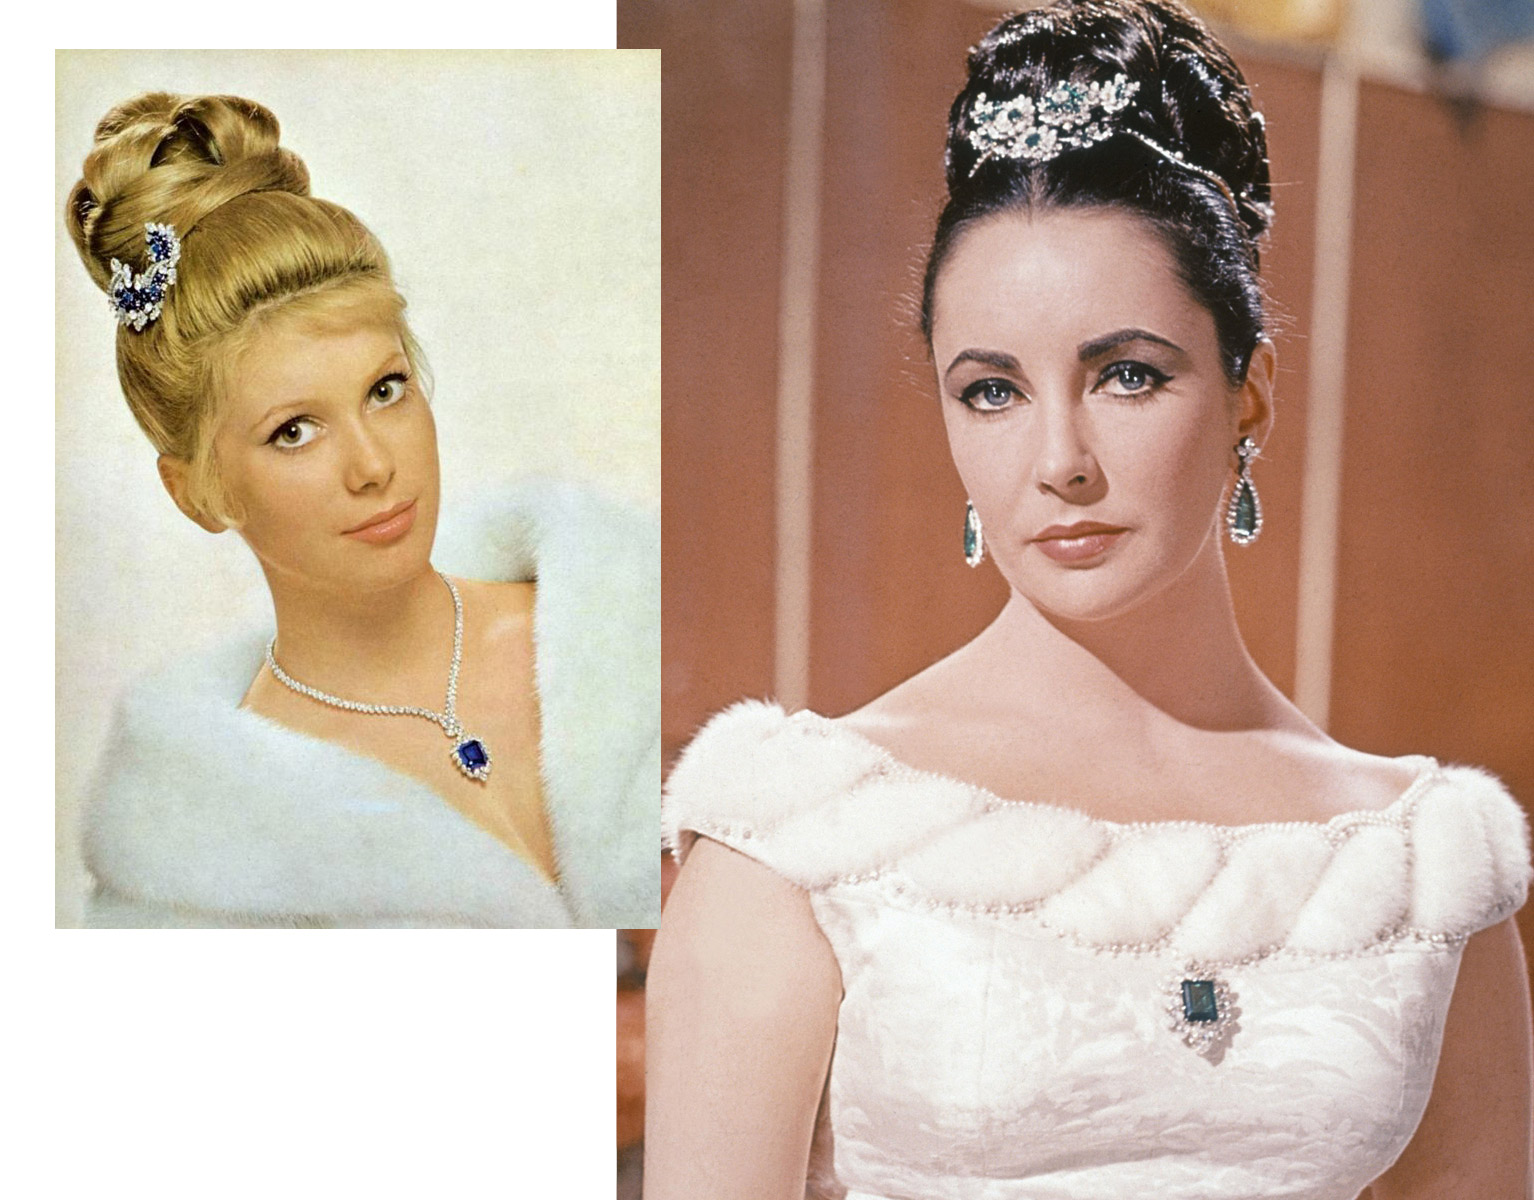 Catherine Deneuve on the left and Elizabeth Taylor on the right wearing brooches in their hair